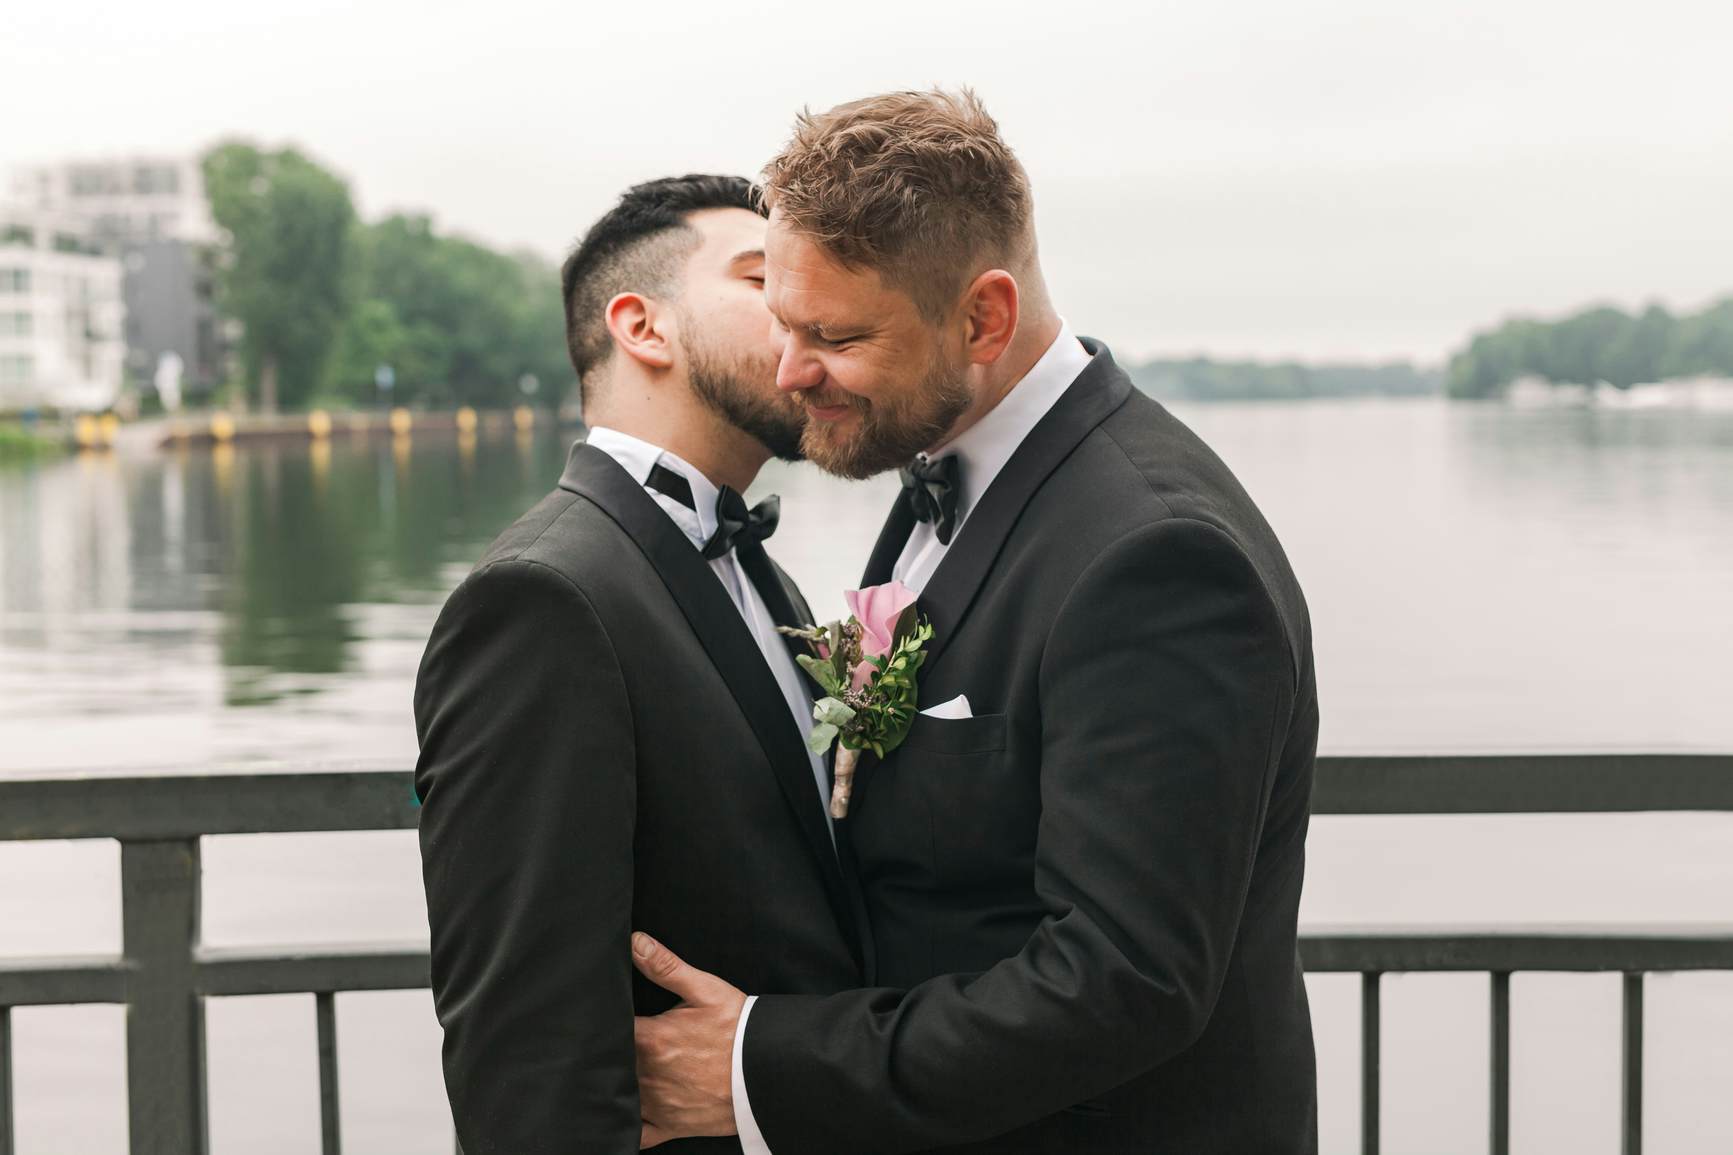 Planning a same sex marriage in Switzerland - all you need to know image